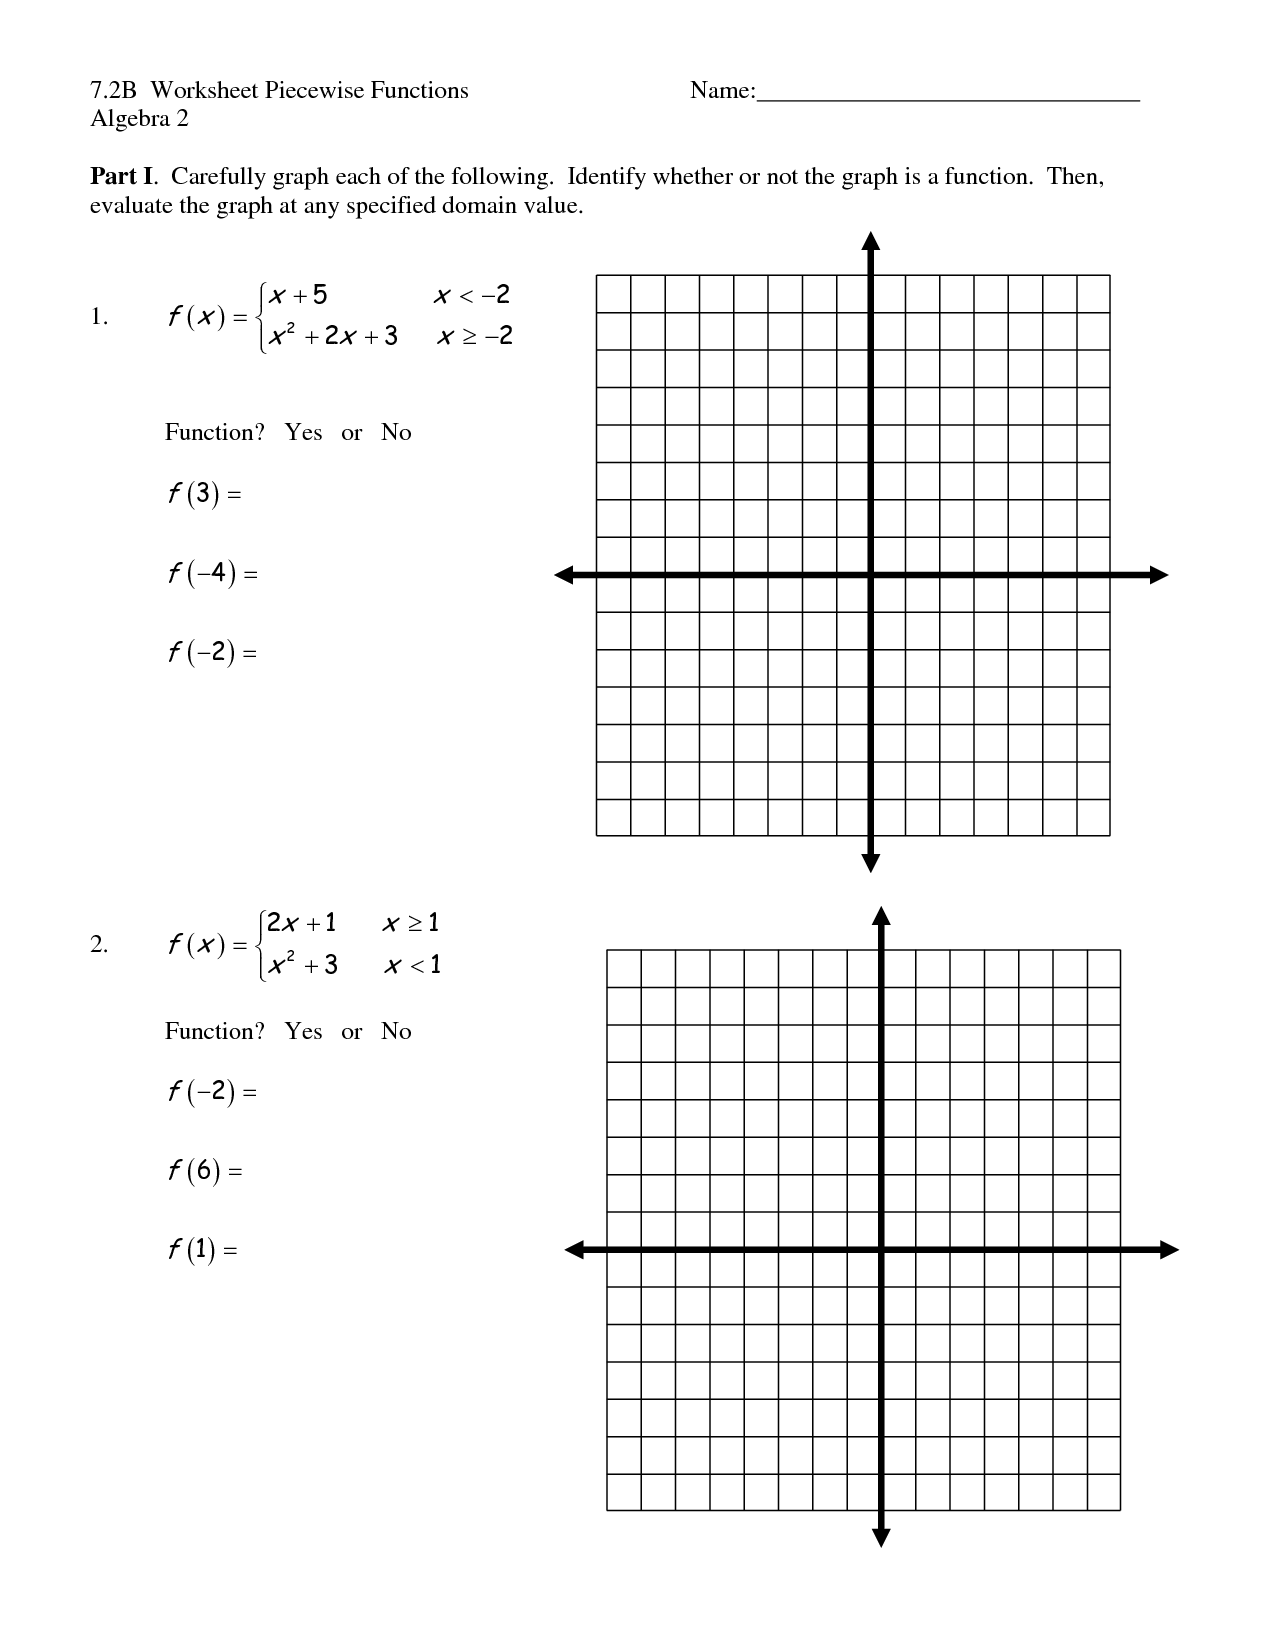 Piecewise Functions Practice Worksheet With Answers - Nidecmege Within Graphing Piecewise Functions Worksheet